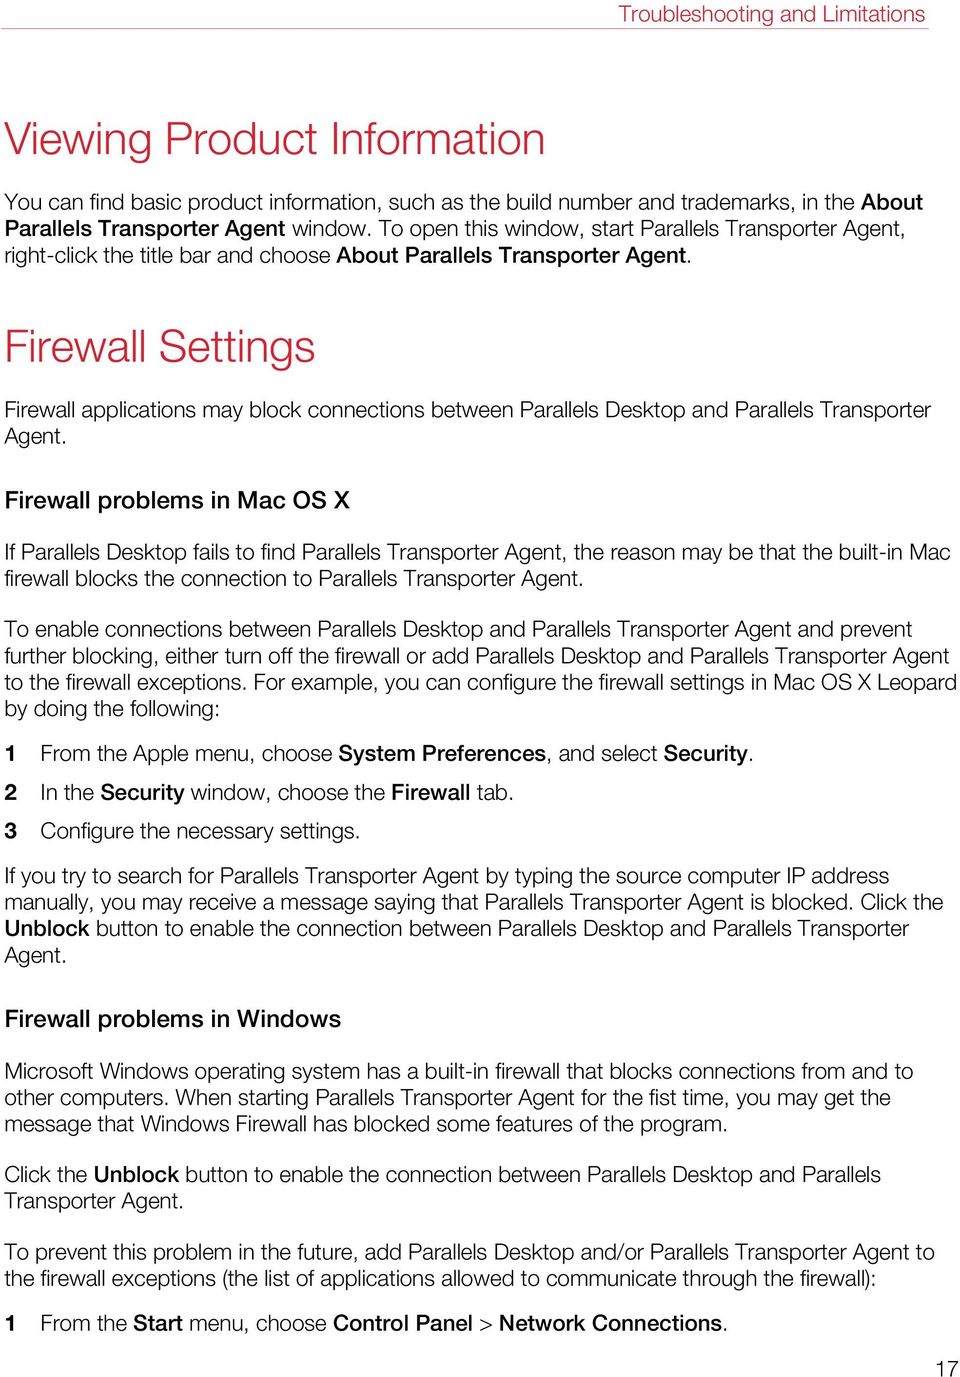 Firewall Settings Firewall applications may block connections between Parallels Desktop and Parallels Transporter Agent.